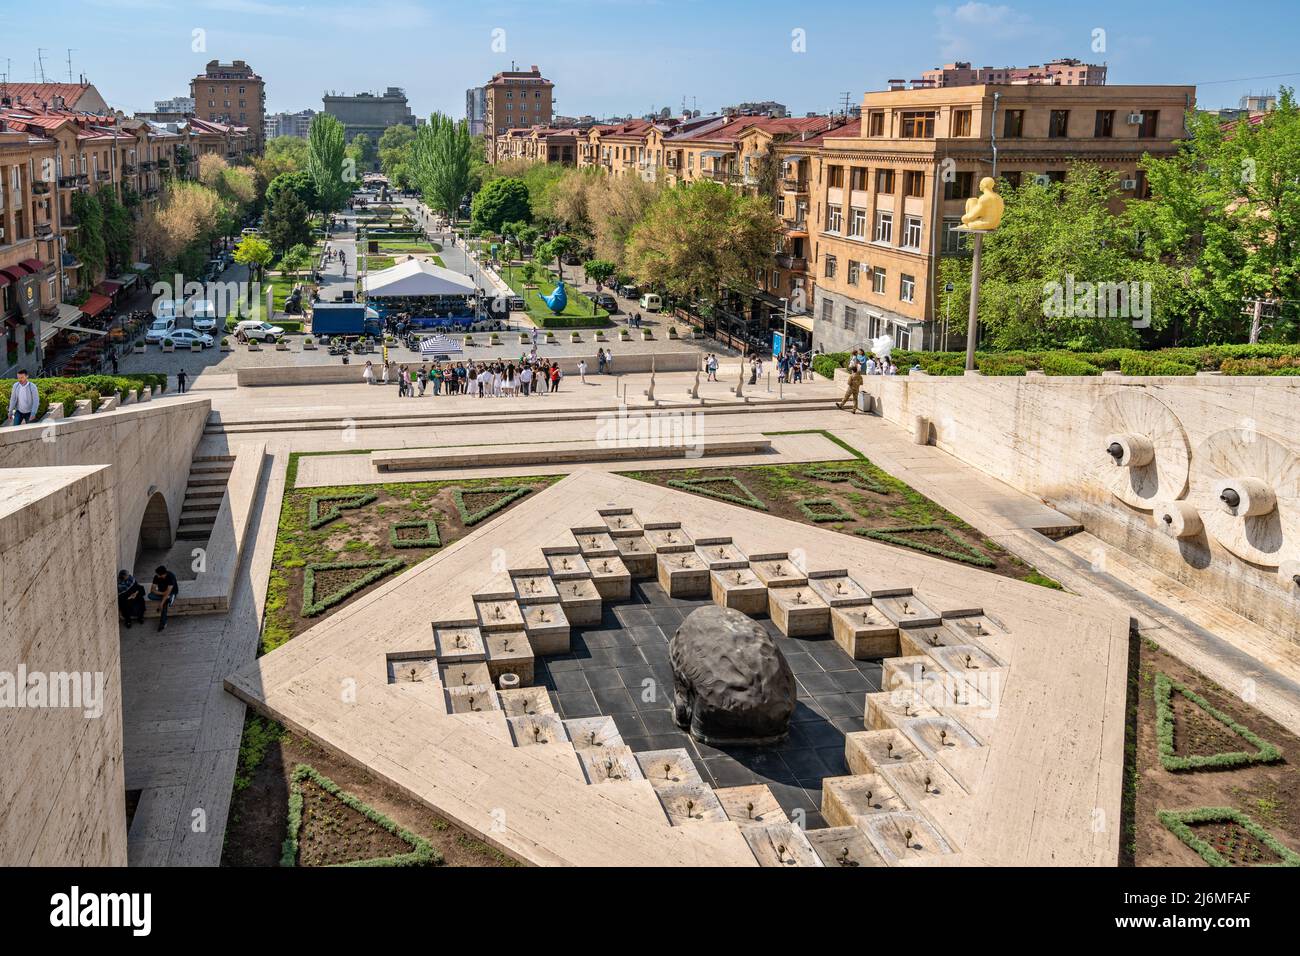 Yerevan, Armenia - April 30, 2022 - Yerevan city aerial view seen from the top of Casecade Complex in Yerevan, Armenia on a bright sunny day Stock Photo